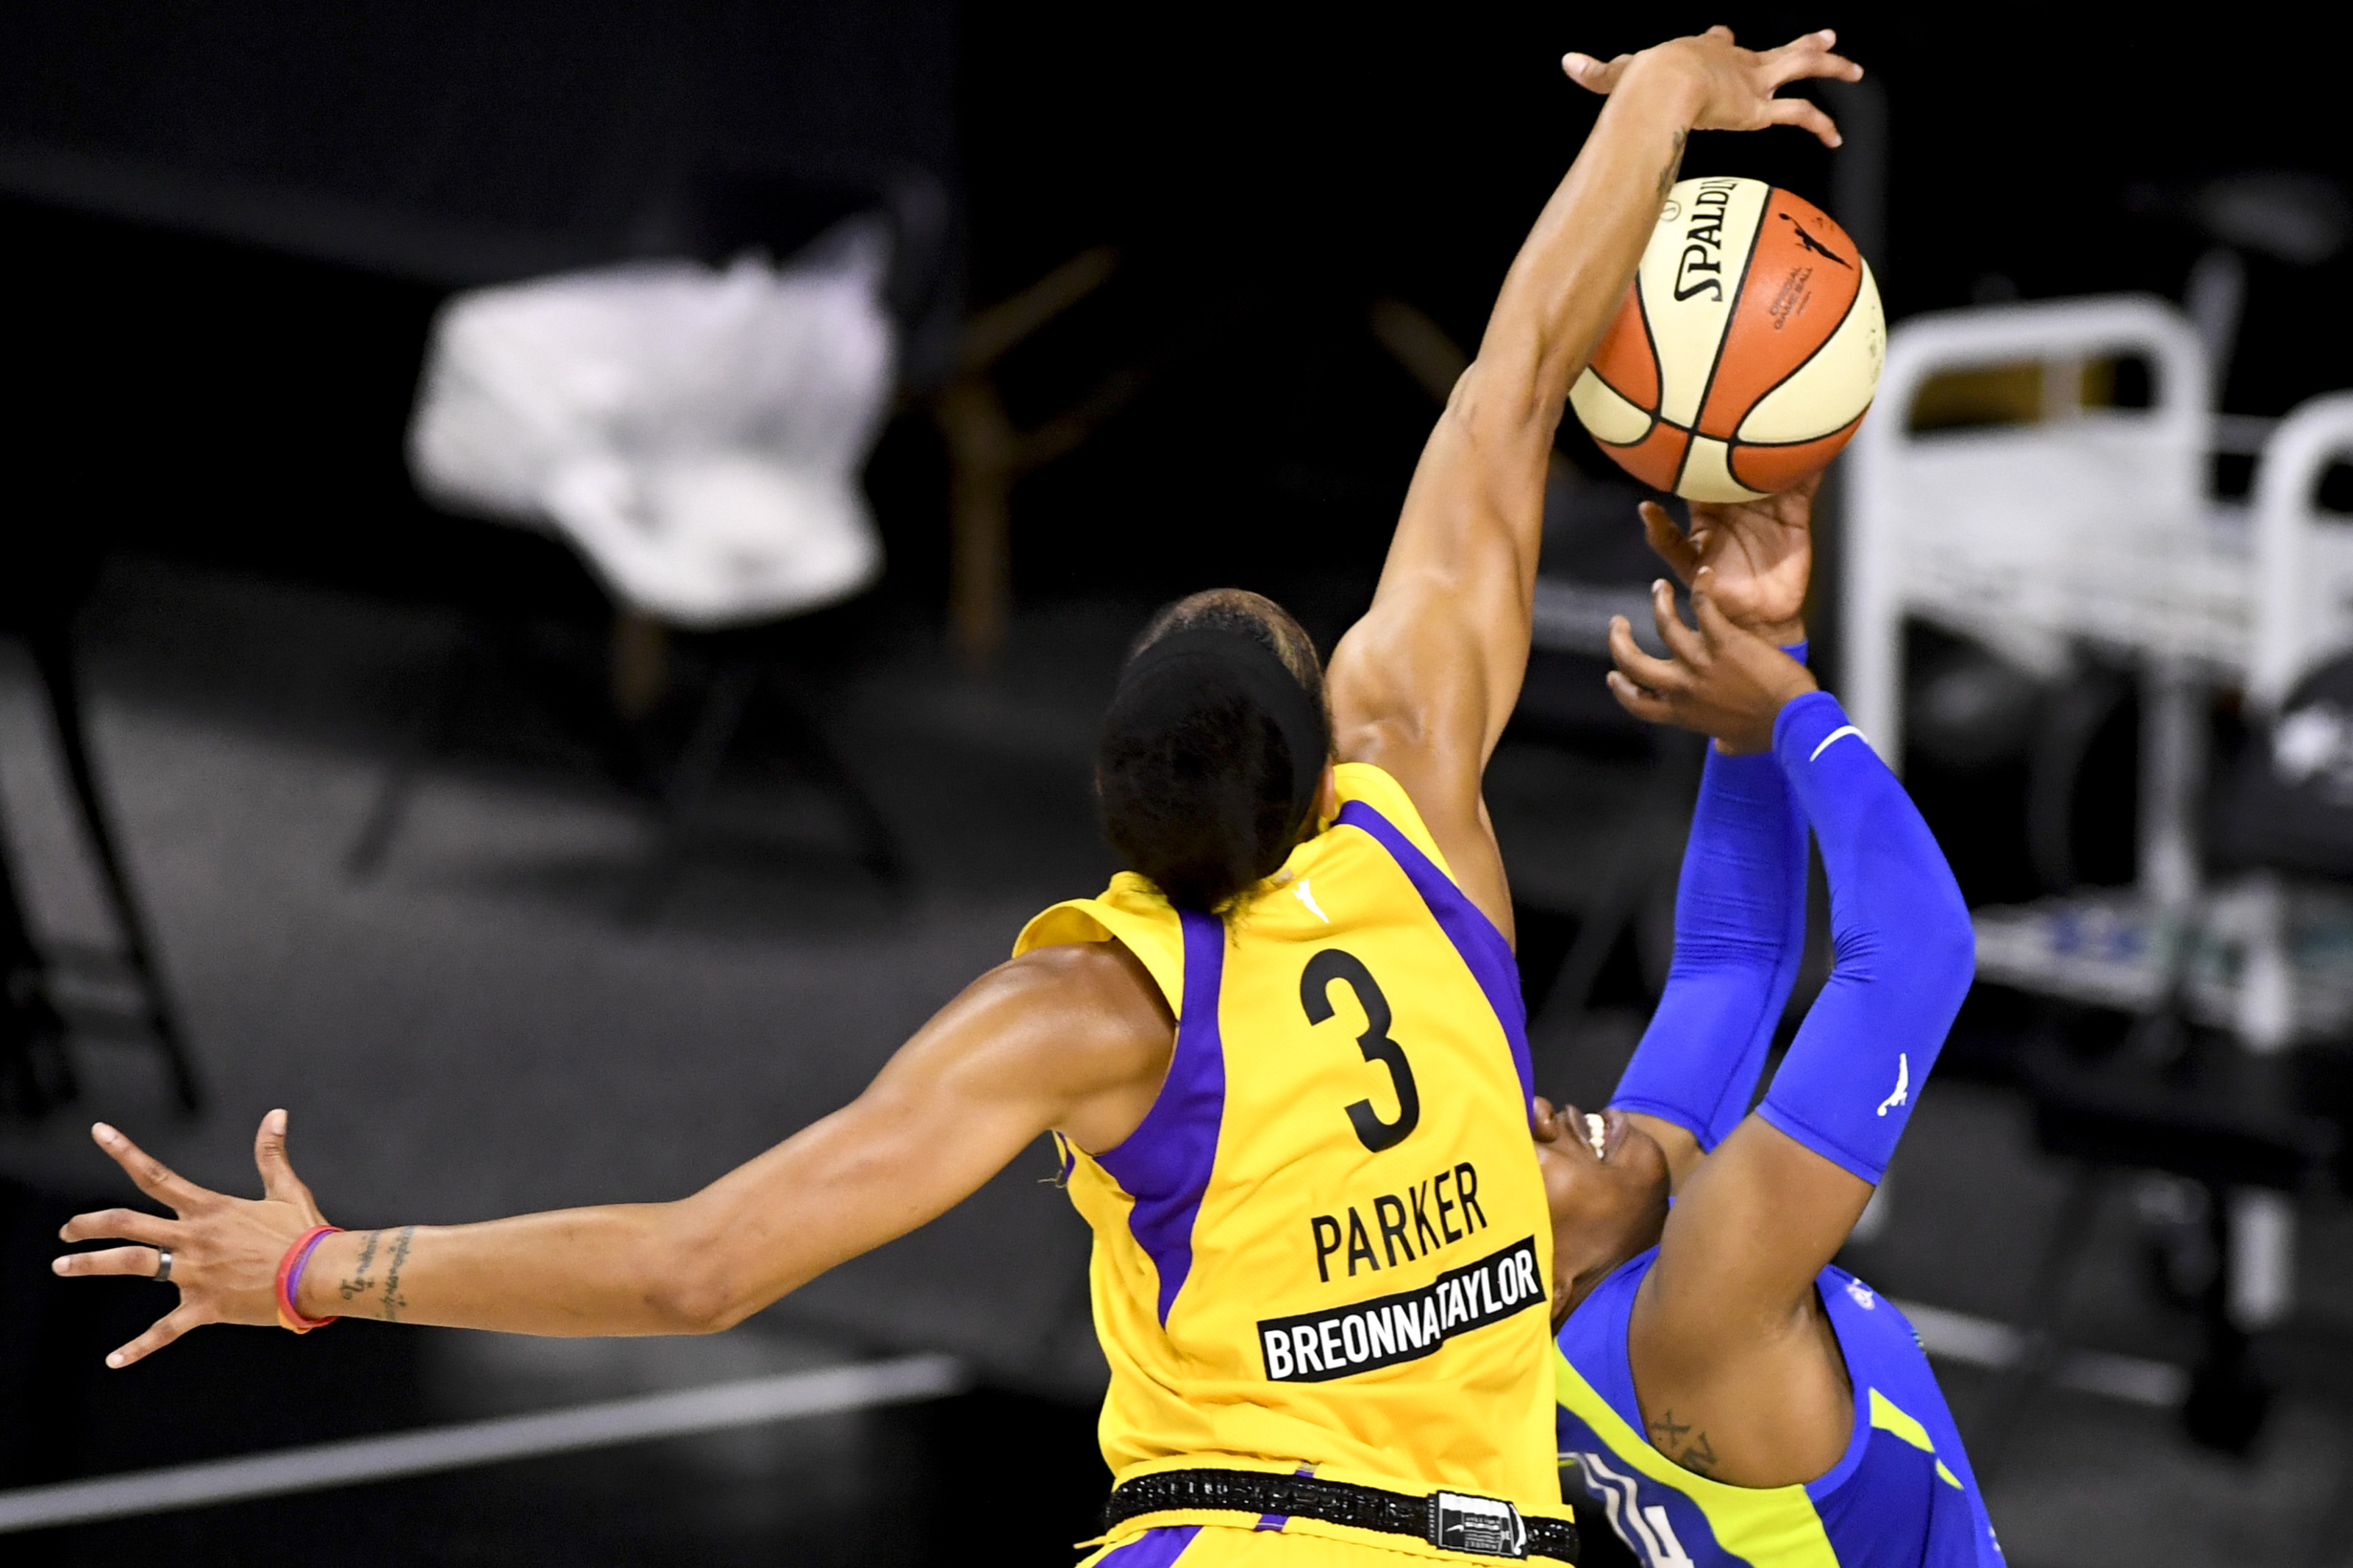 AP names Candace Parker WNBA Defensive Player of the Year